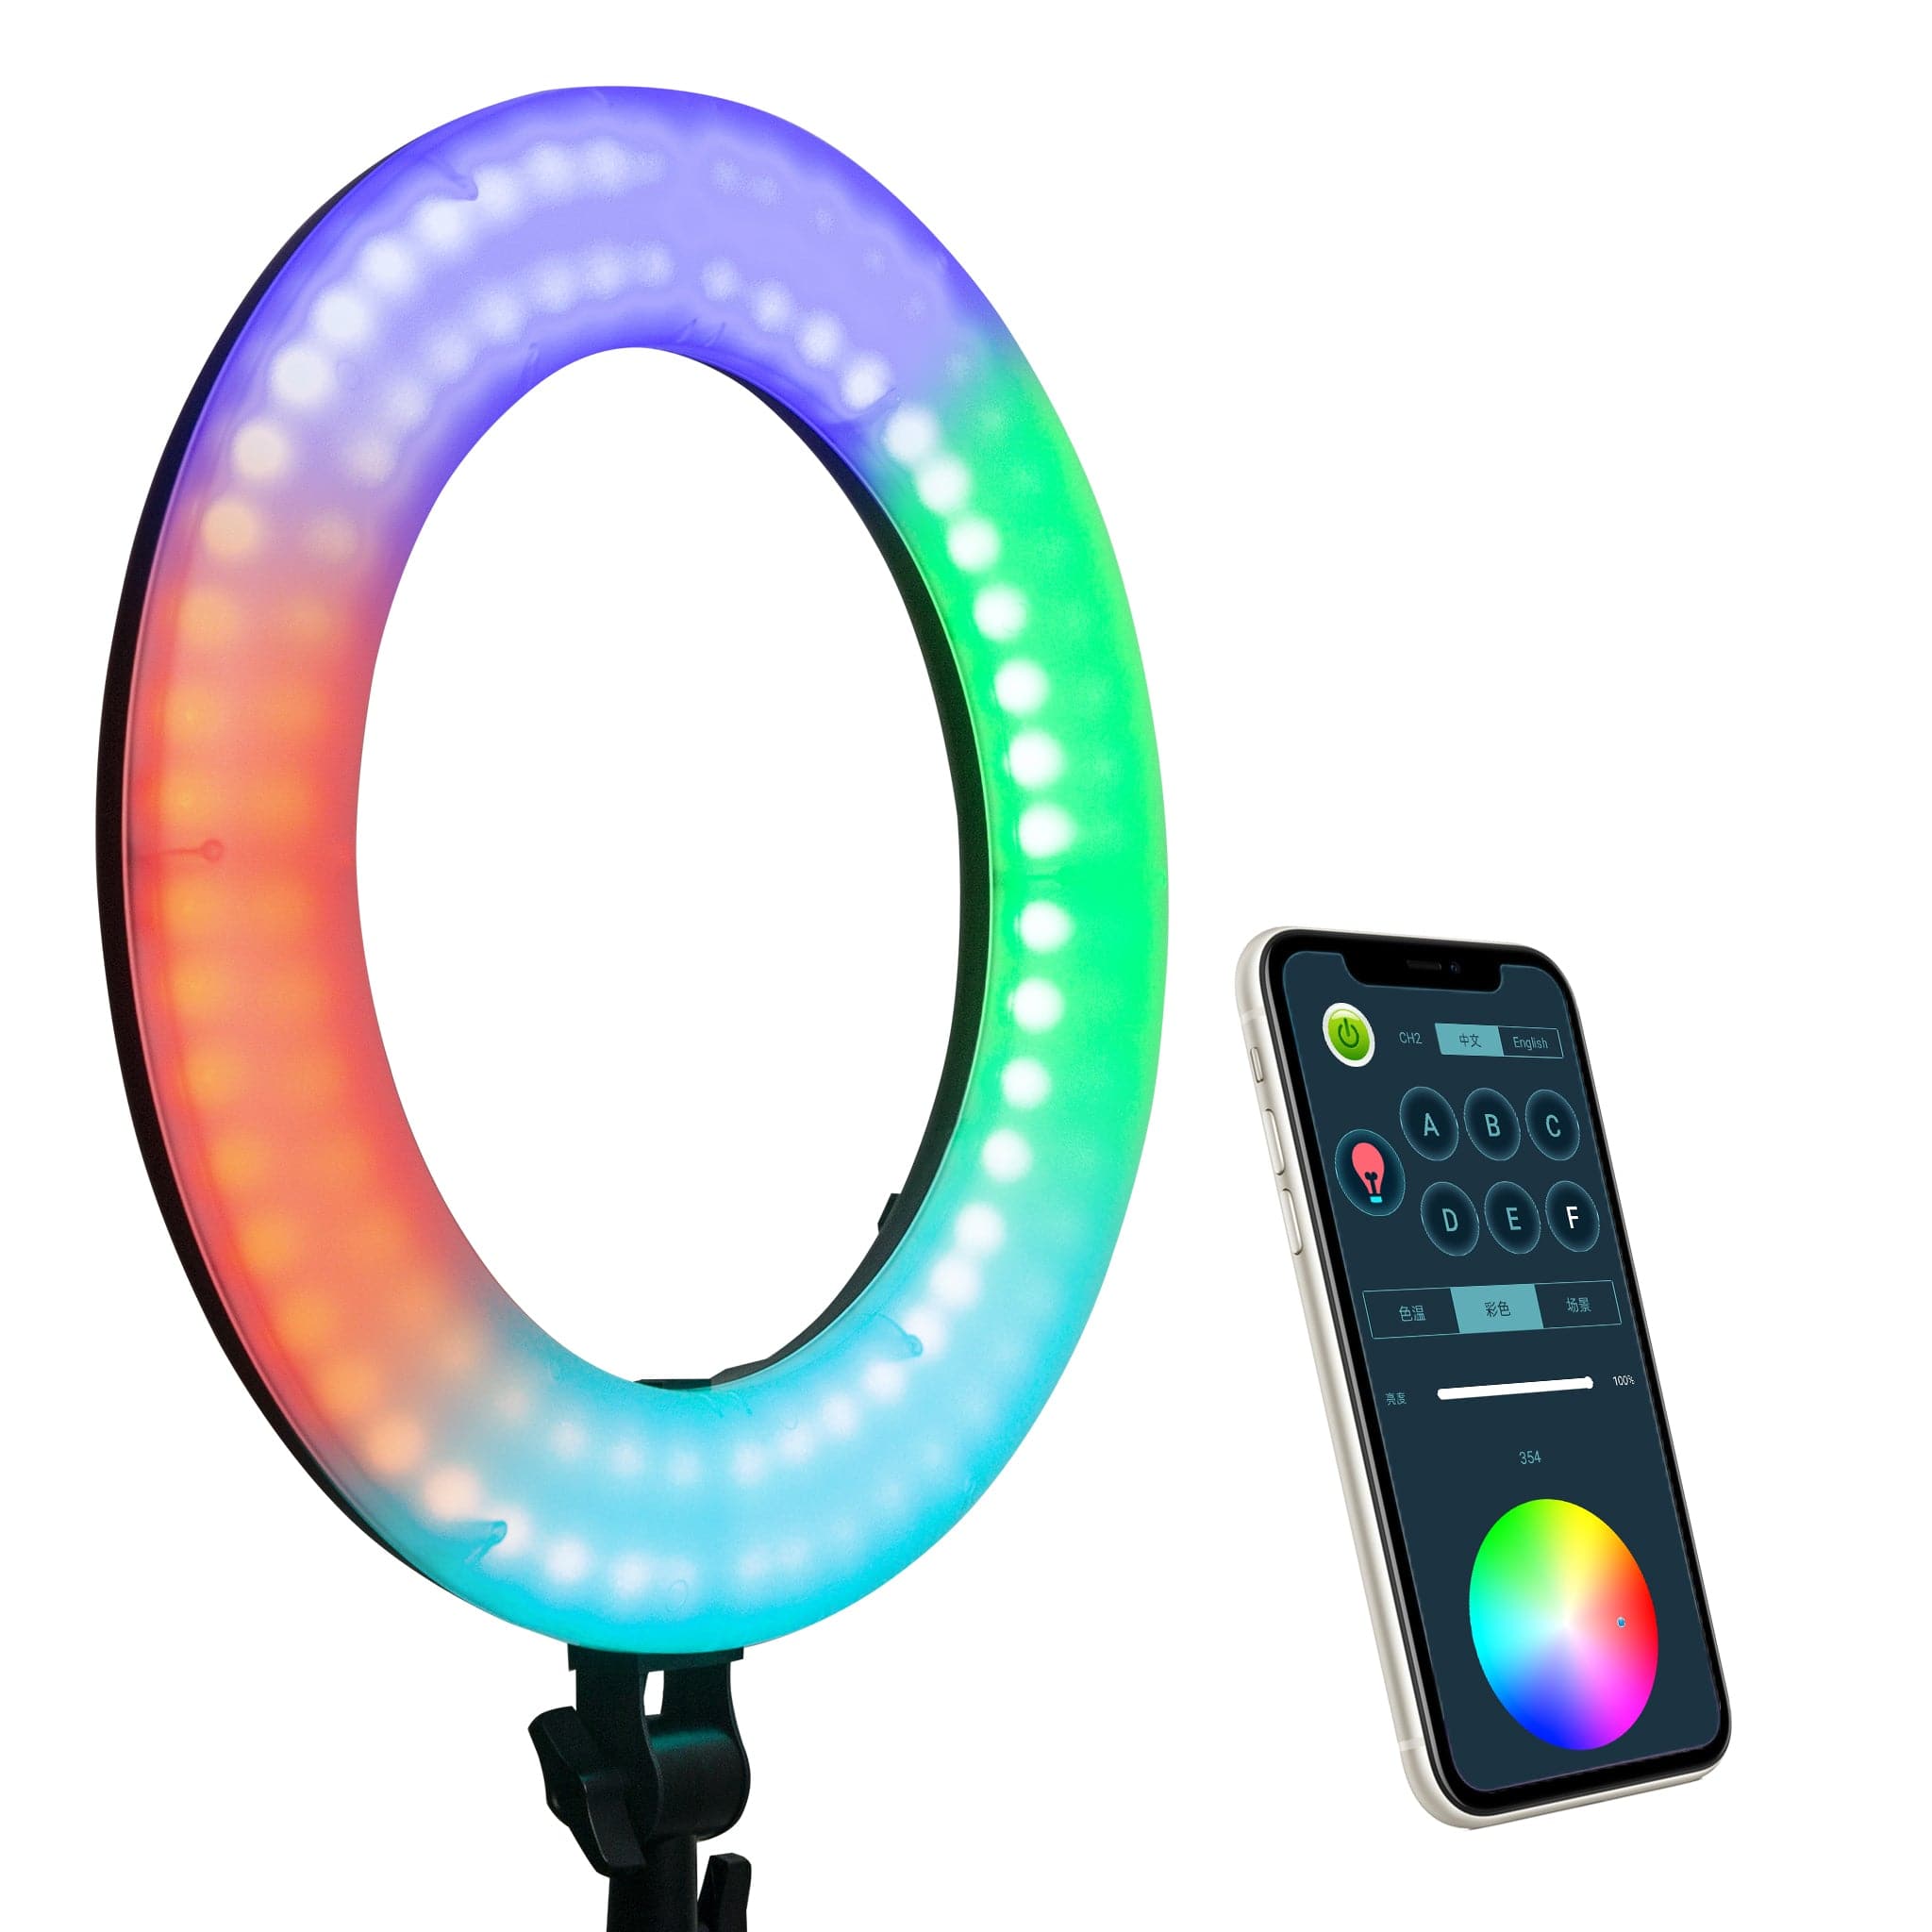 Neewer 18-inch RGB Ring Light with Stand, Dimmable Bi-Color CRI 97